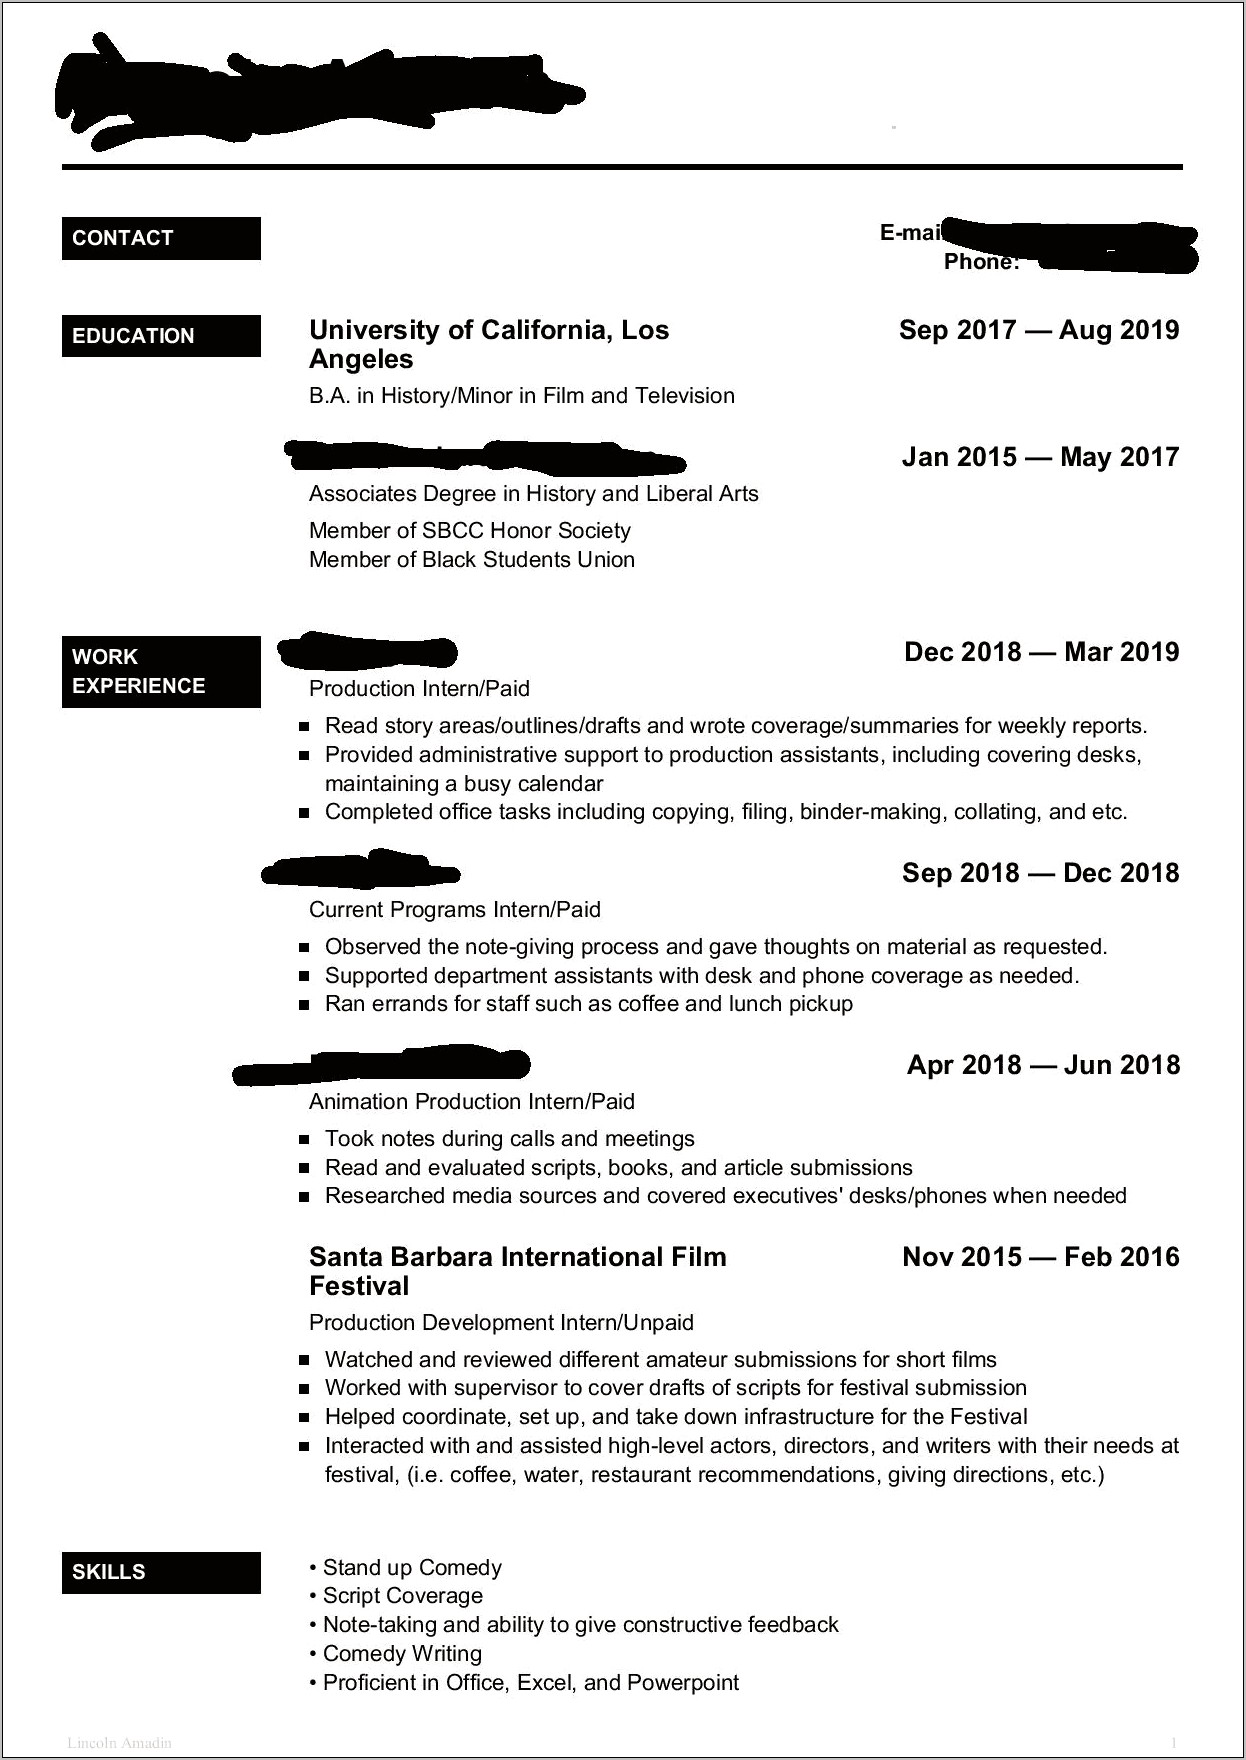 Resume Note If Experience Was Unpaid